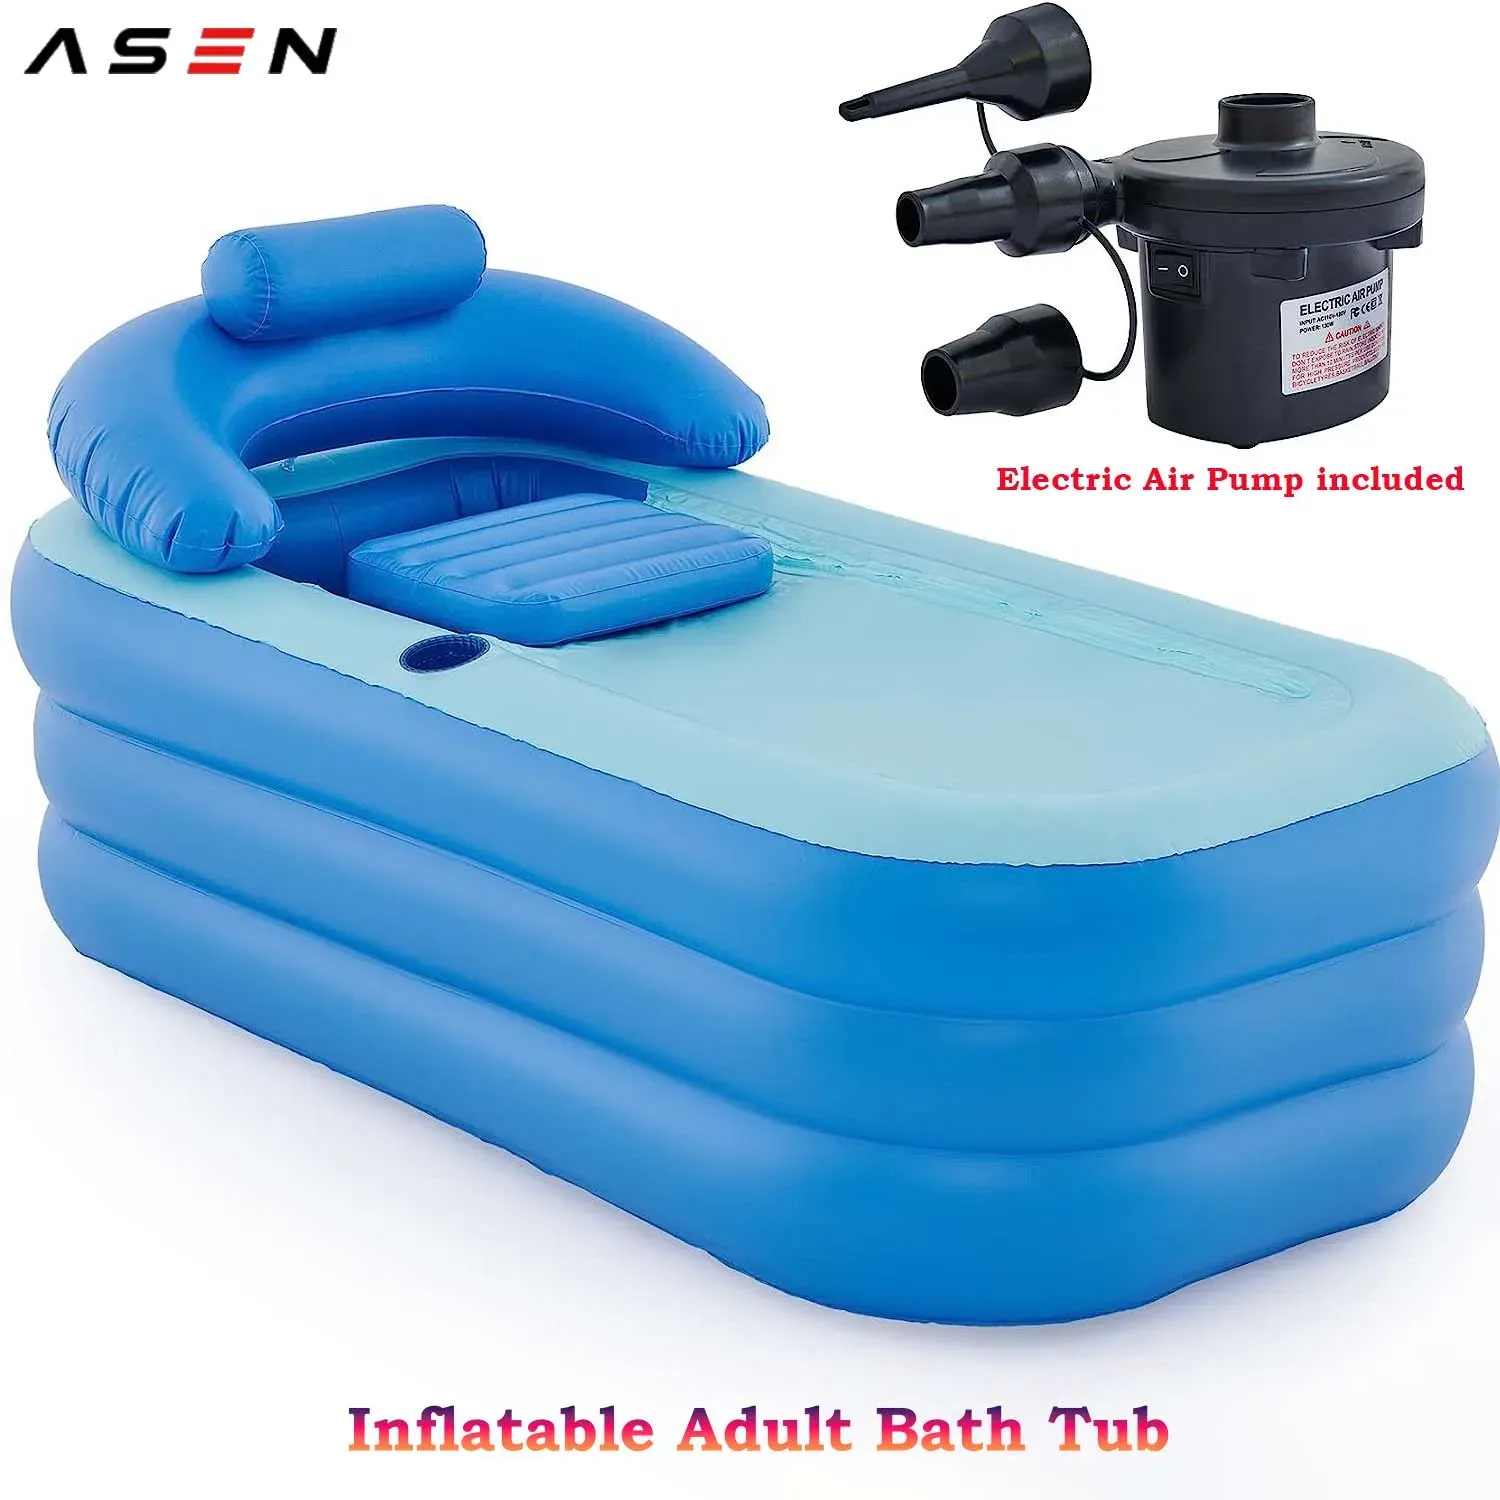 Bathtubs Inflatable Adult Bath Tub, FreeStanding Blow Up Bathtub with Foldable Portable Feature for Adult Spa with Electric Air Pump PVC